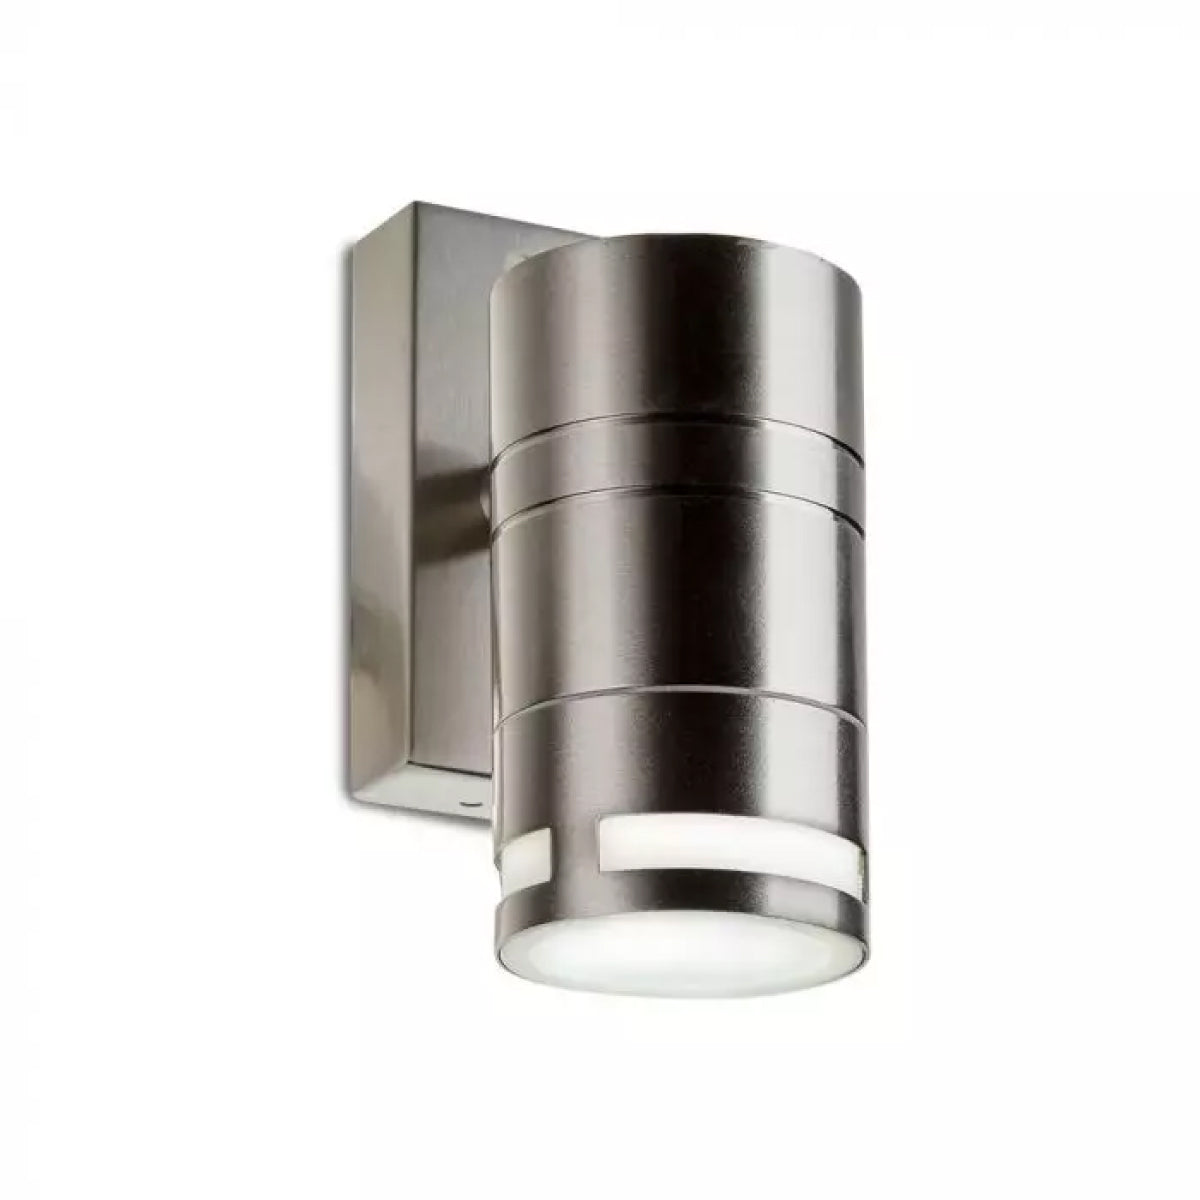 View Stainless Steel Outdoor Wall Light Fitting information